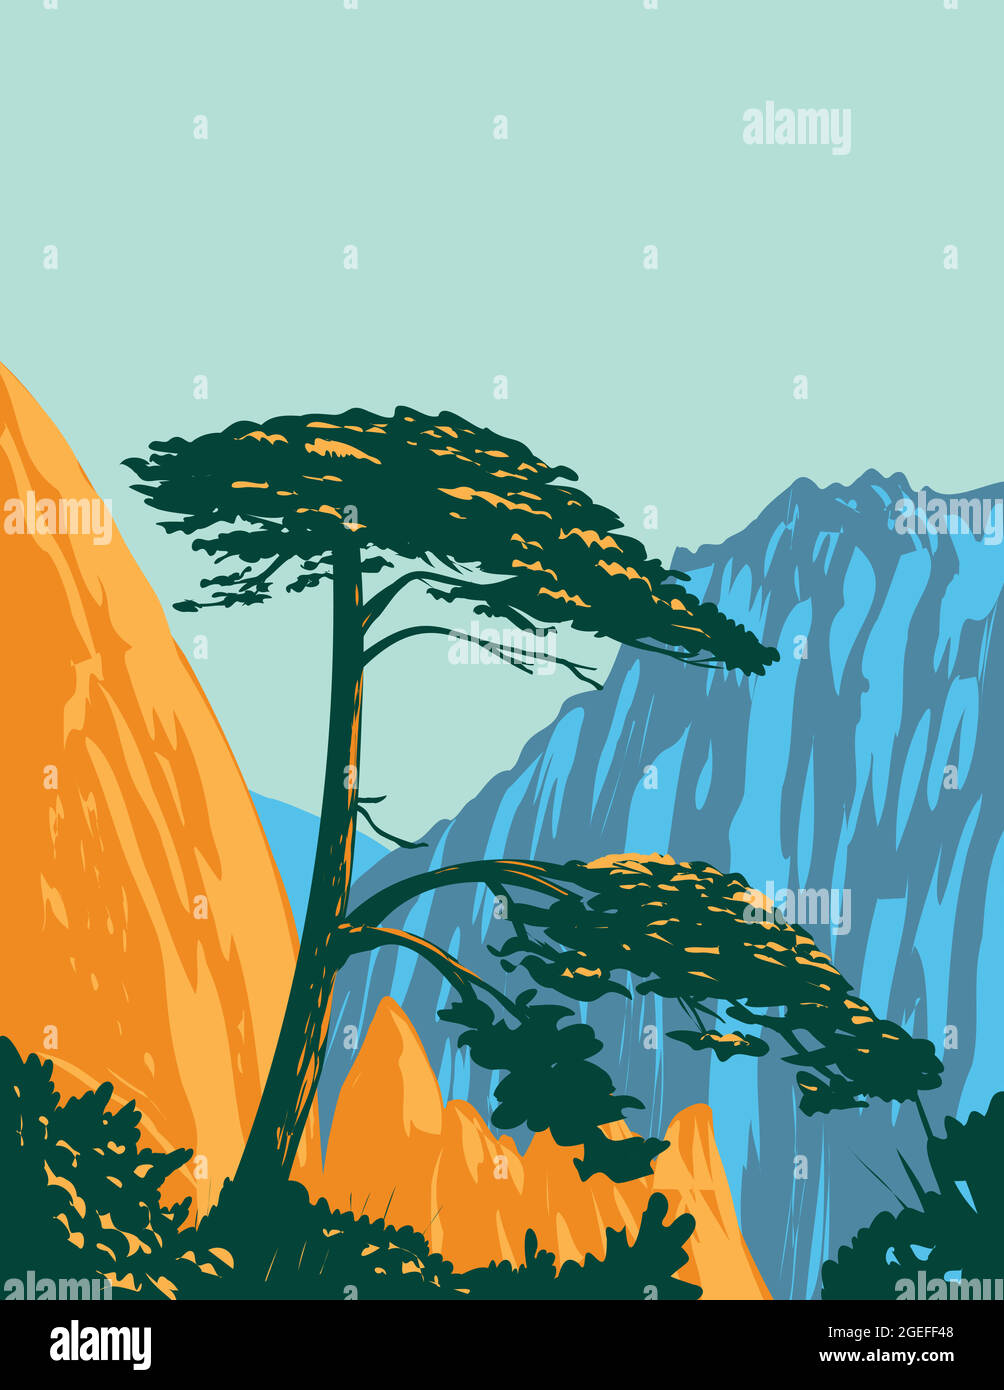 WPA poster art of a Pinus hwangshanensis or Huangshan pine on Huangshan Mountains in southern Anhui Province, Huangshan City, Eastern China done in wo Stock Vector